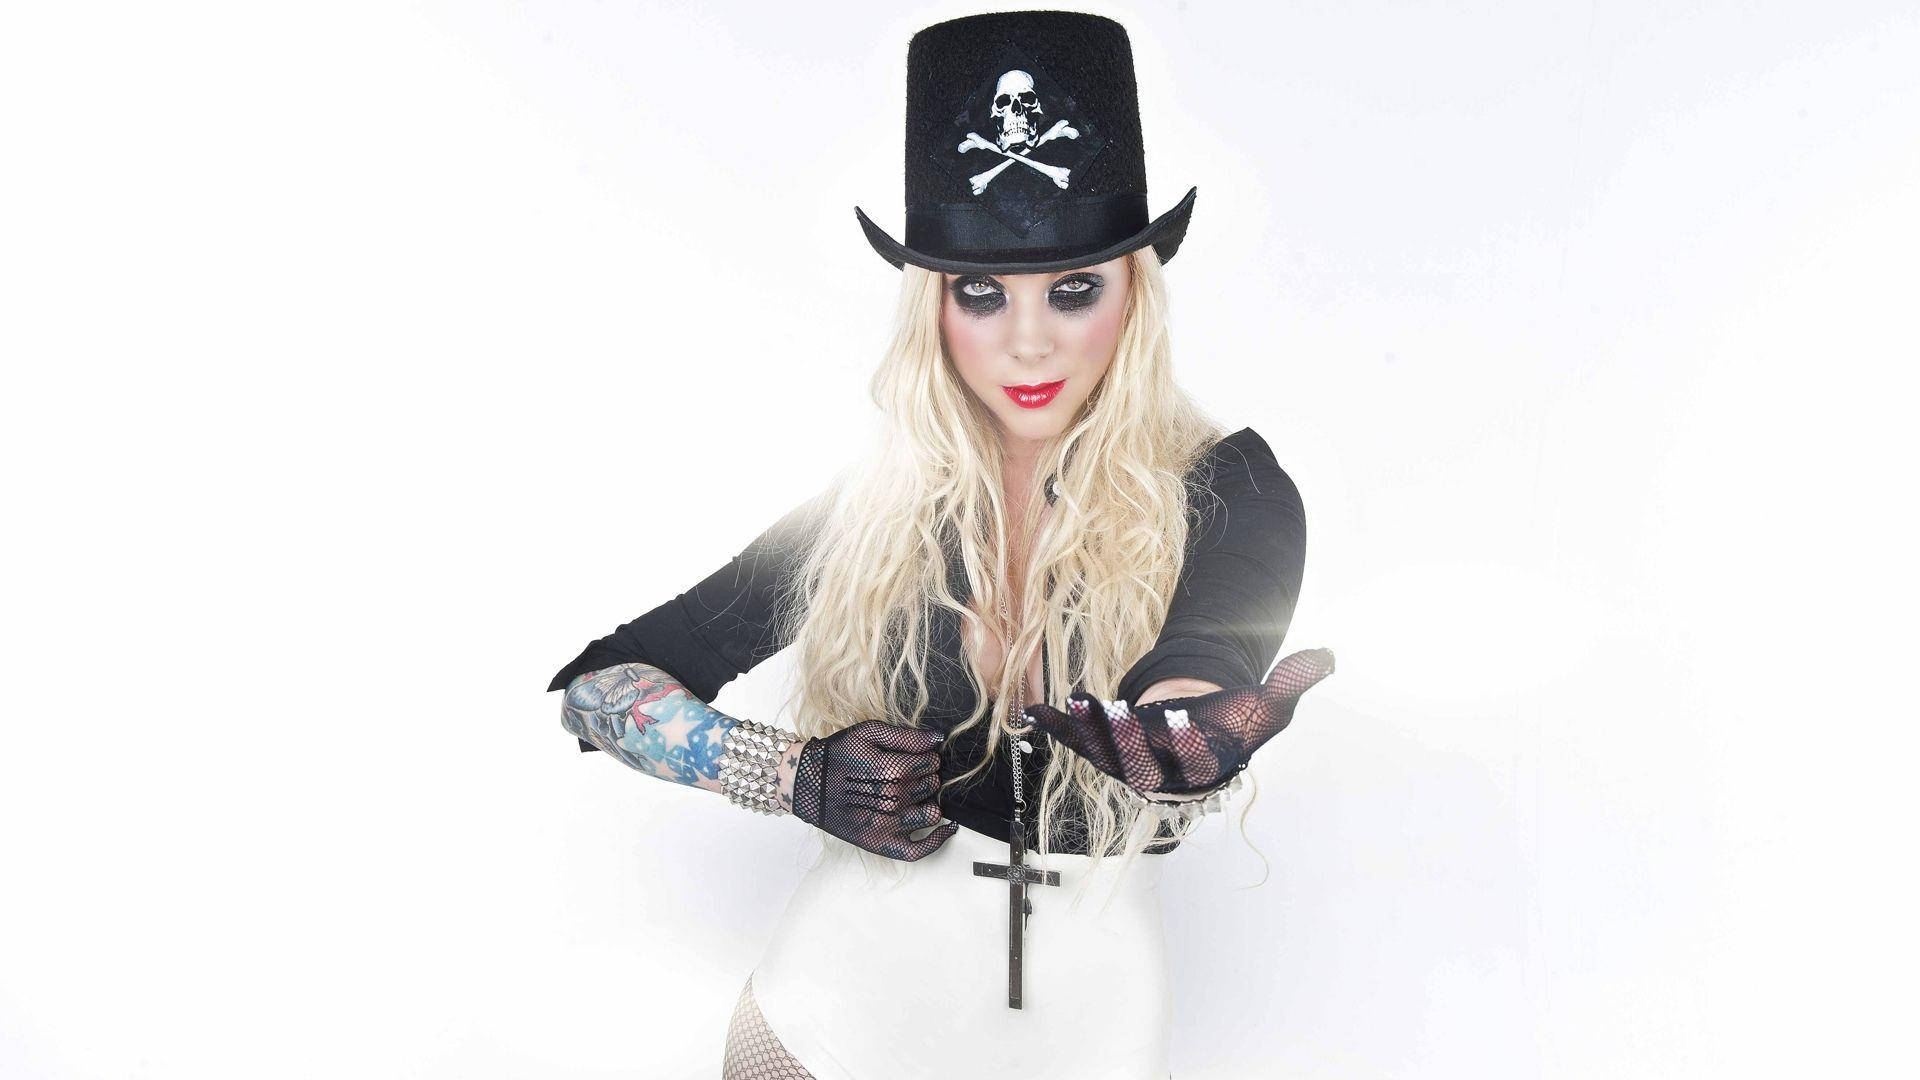 Maria Brink, the dynamic singer of In This Moment in action Wallpaper